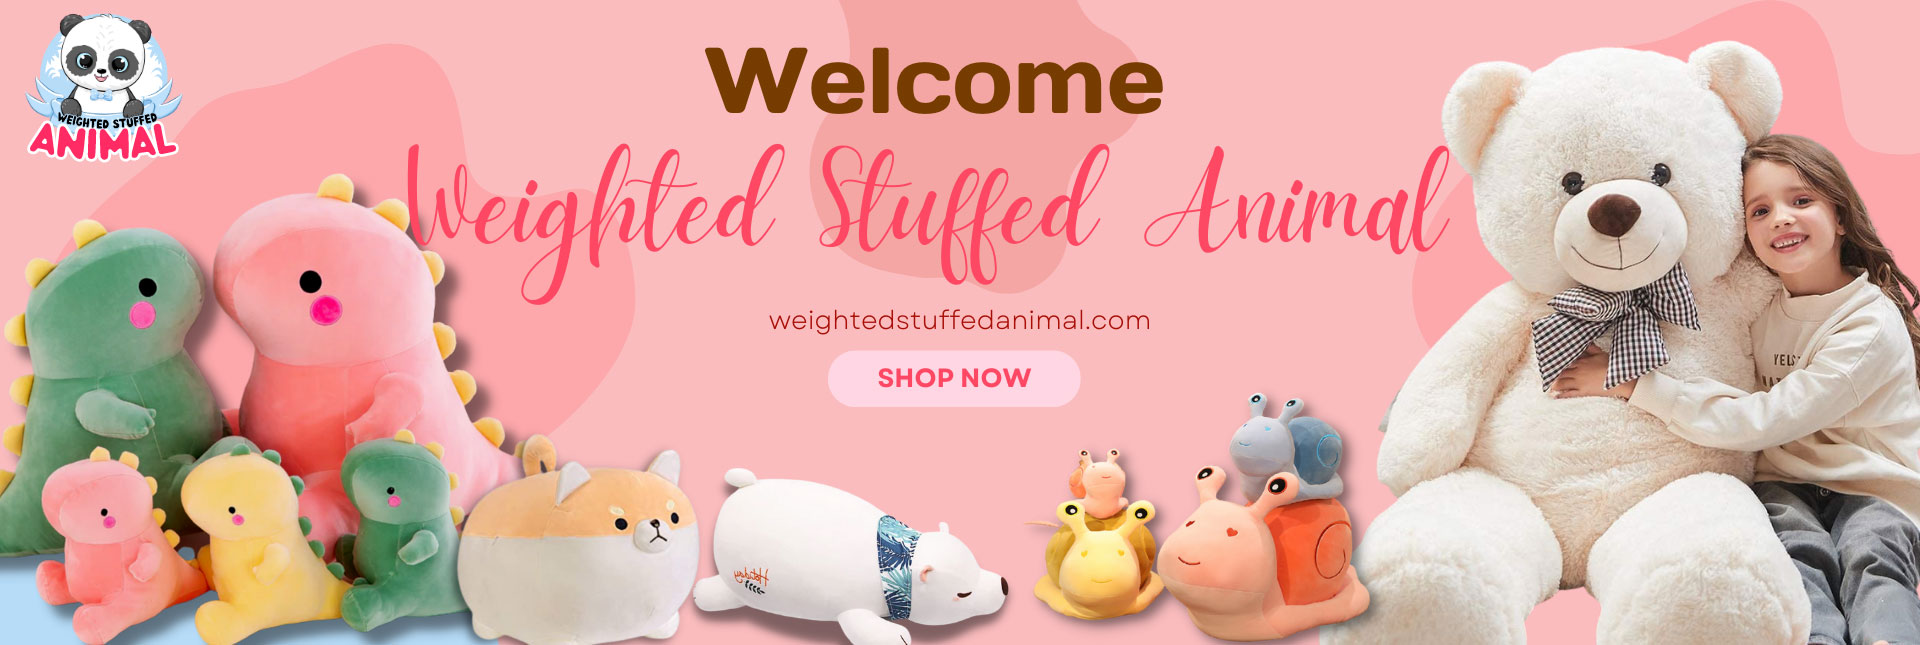 Weighted Stuffed Animal Banner 1